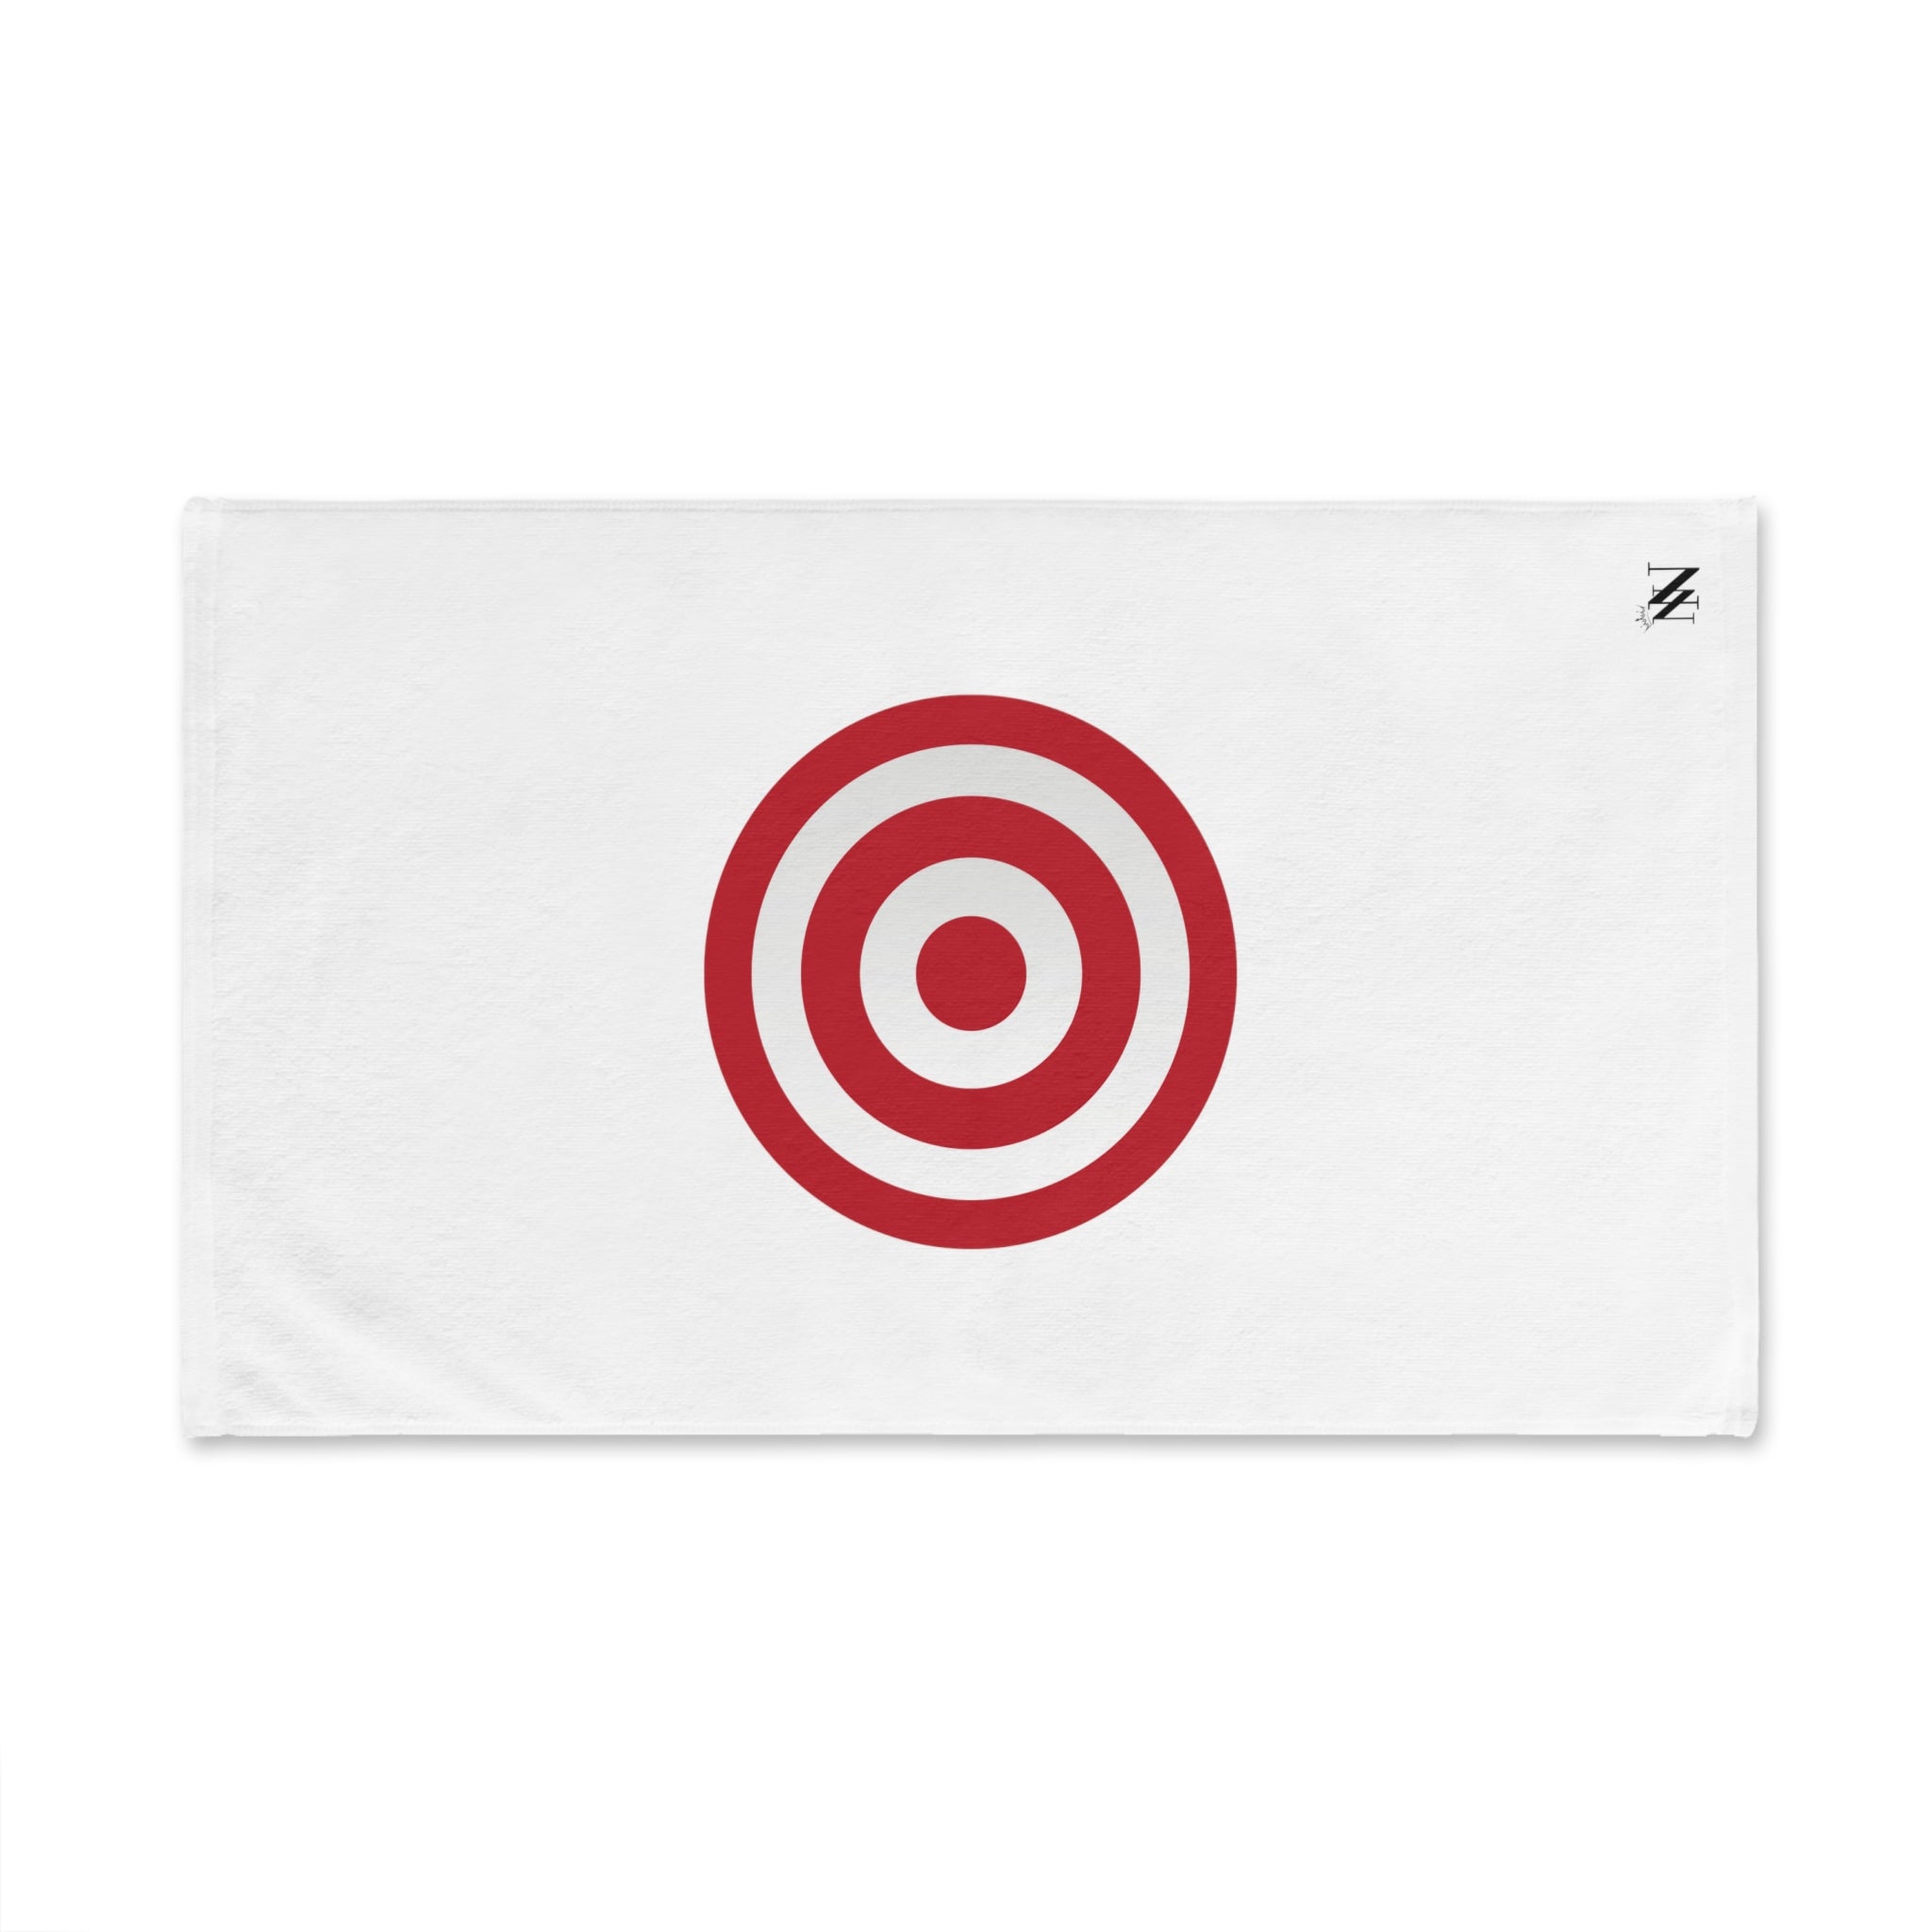 Medium Red Bullseye White | Funny Gifts for Men - Gifts for Him - Birthday Gifts for Men, Him, Her, Husband, Boyfriend, Girlfriend, New Couple Gifts, Fathers & Valentines Day Gifts, Christmas Gifts NECTAR NAPKINS